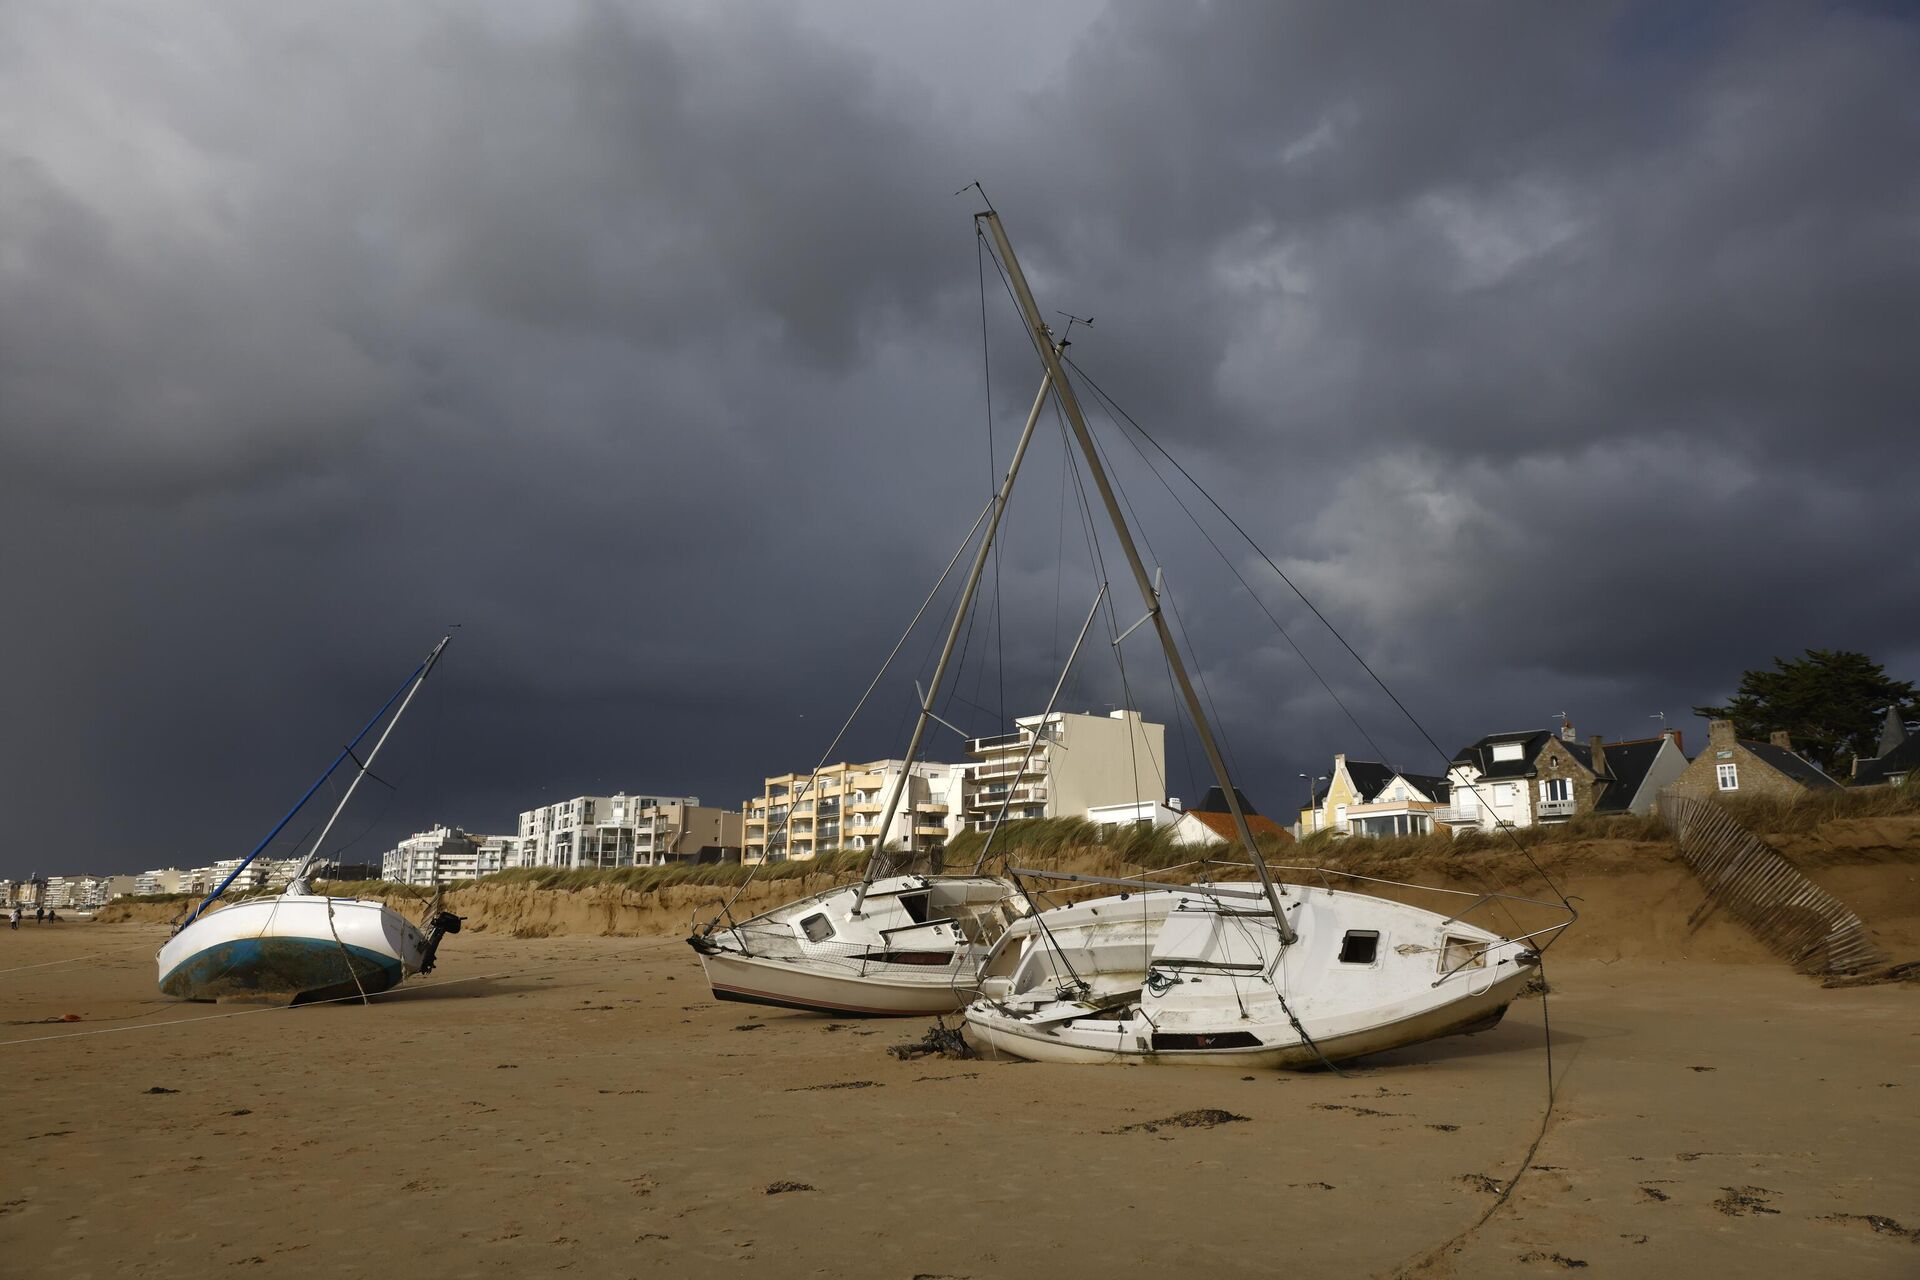 Washed ashore boats may on the sand on the beach of Pornichet, Brittany, Thursday, Nov. 2, 2023. Winds up to 180 kilometers per hour (108 mph) slammed the French Atlantic coast overnight along with violent rains and huge waves, as Storm Ciaran uprooted trees, blew out windows. - Sputnik International, 1920, 02.11.2023